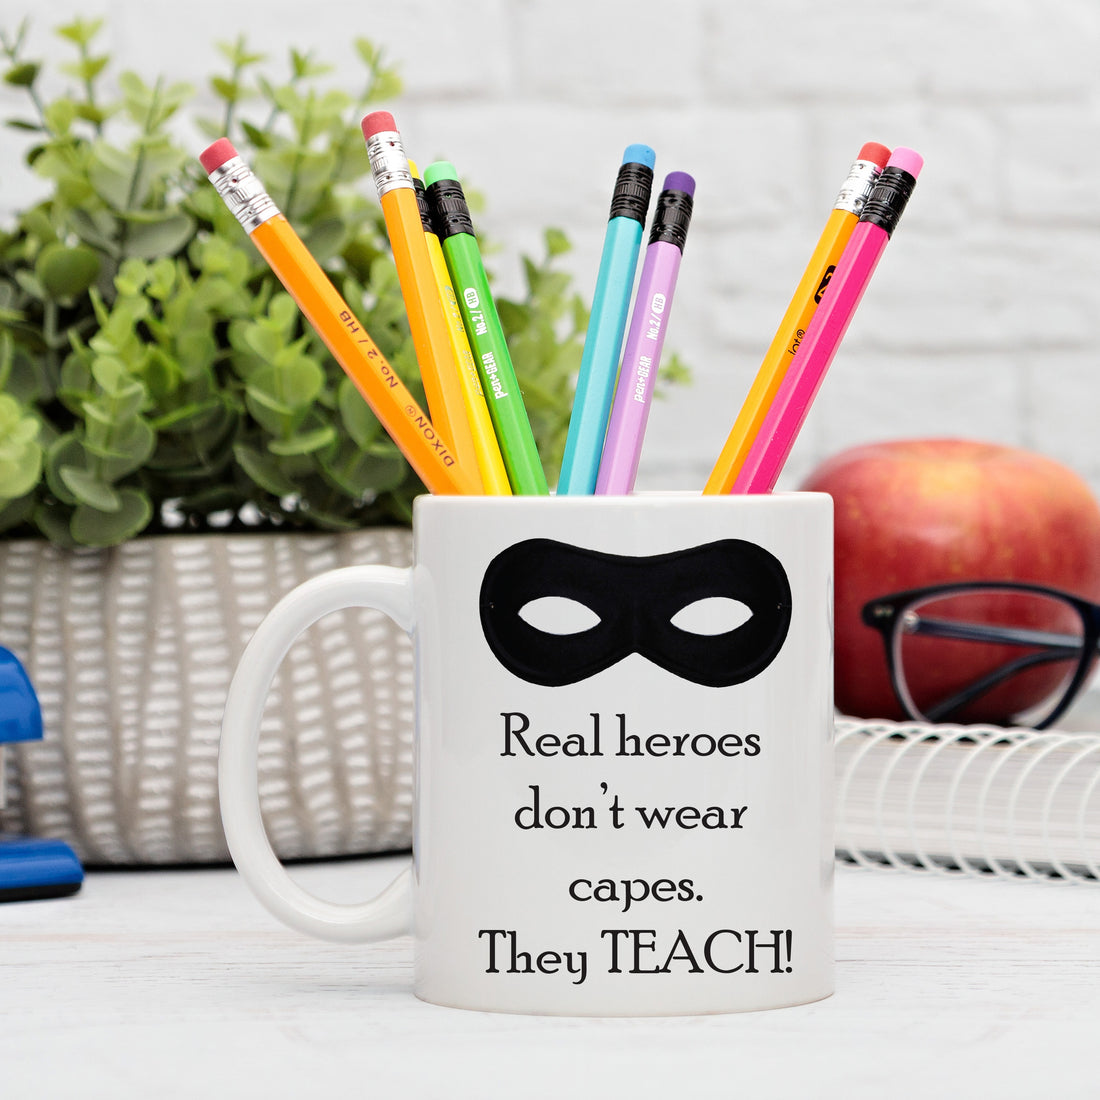 Thoughtful End-of-Term Thank You Gifts for Teachers